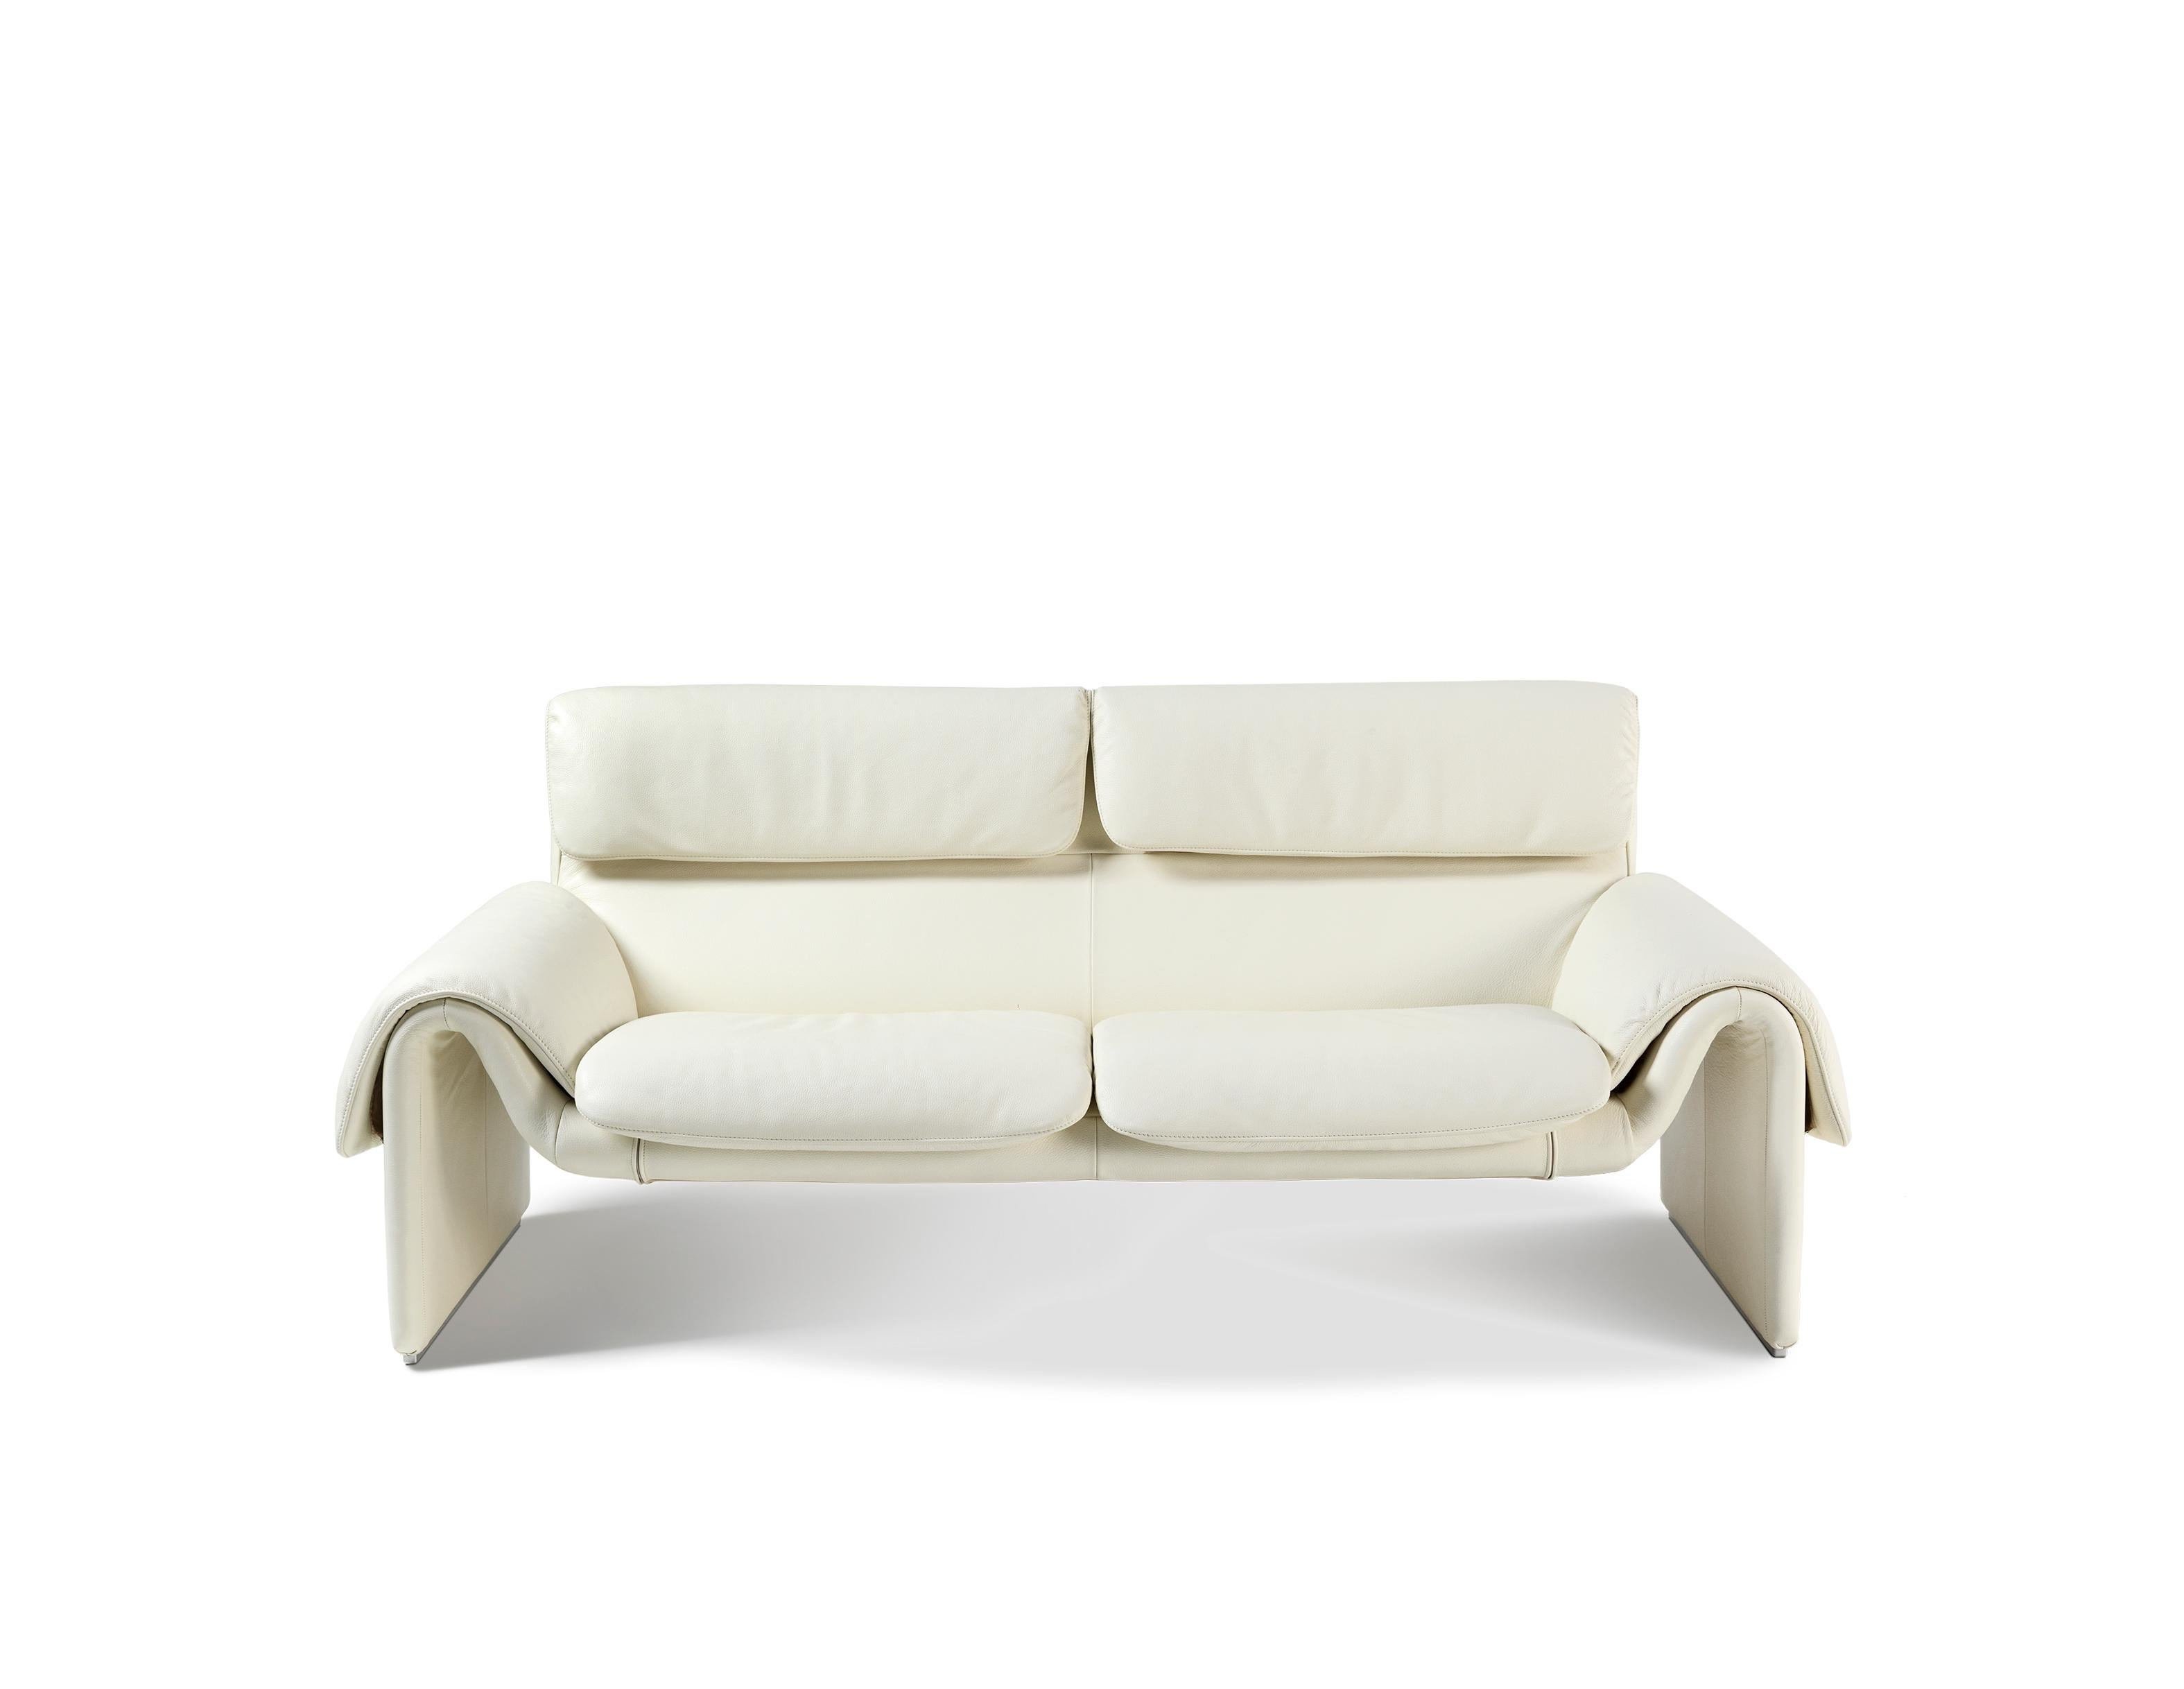 DS-2011/02 sofa by De Sede
Dimensions: D 59 x W 163 x H 84 cm
Materials: beechwood, leather

Prices may change according to the chosen materials and size. 

Aesthetics and functionality in a harmonious combination. An impressive design with a